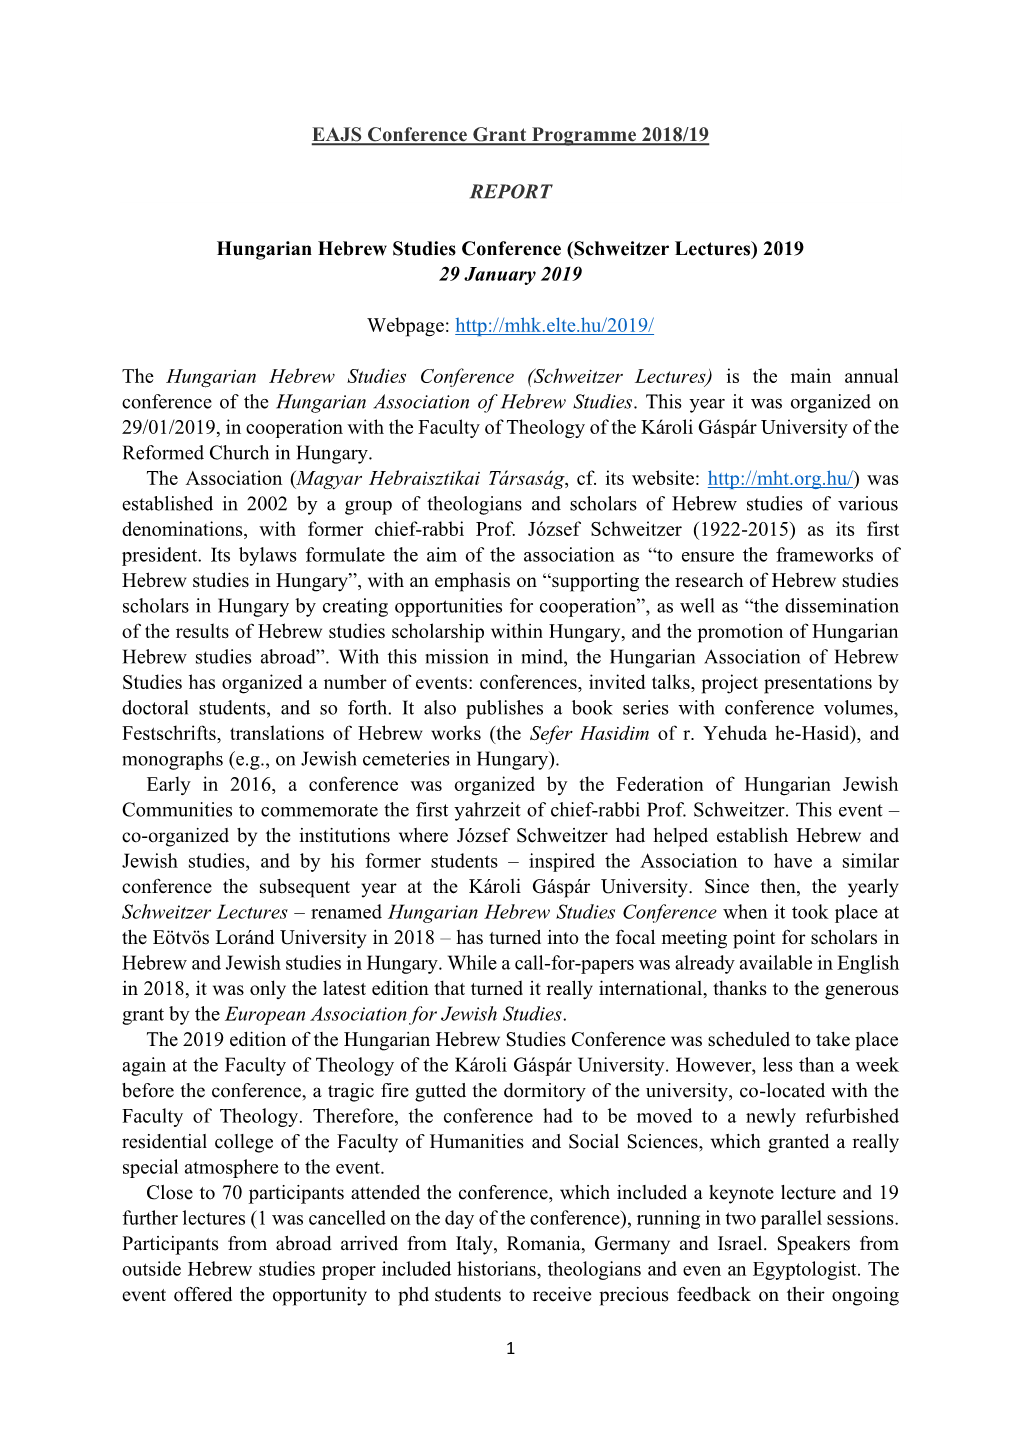 Hungarian Hebrew Studies Conference (Schweitzer Lectures) 2019 29 January 2019